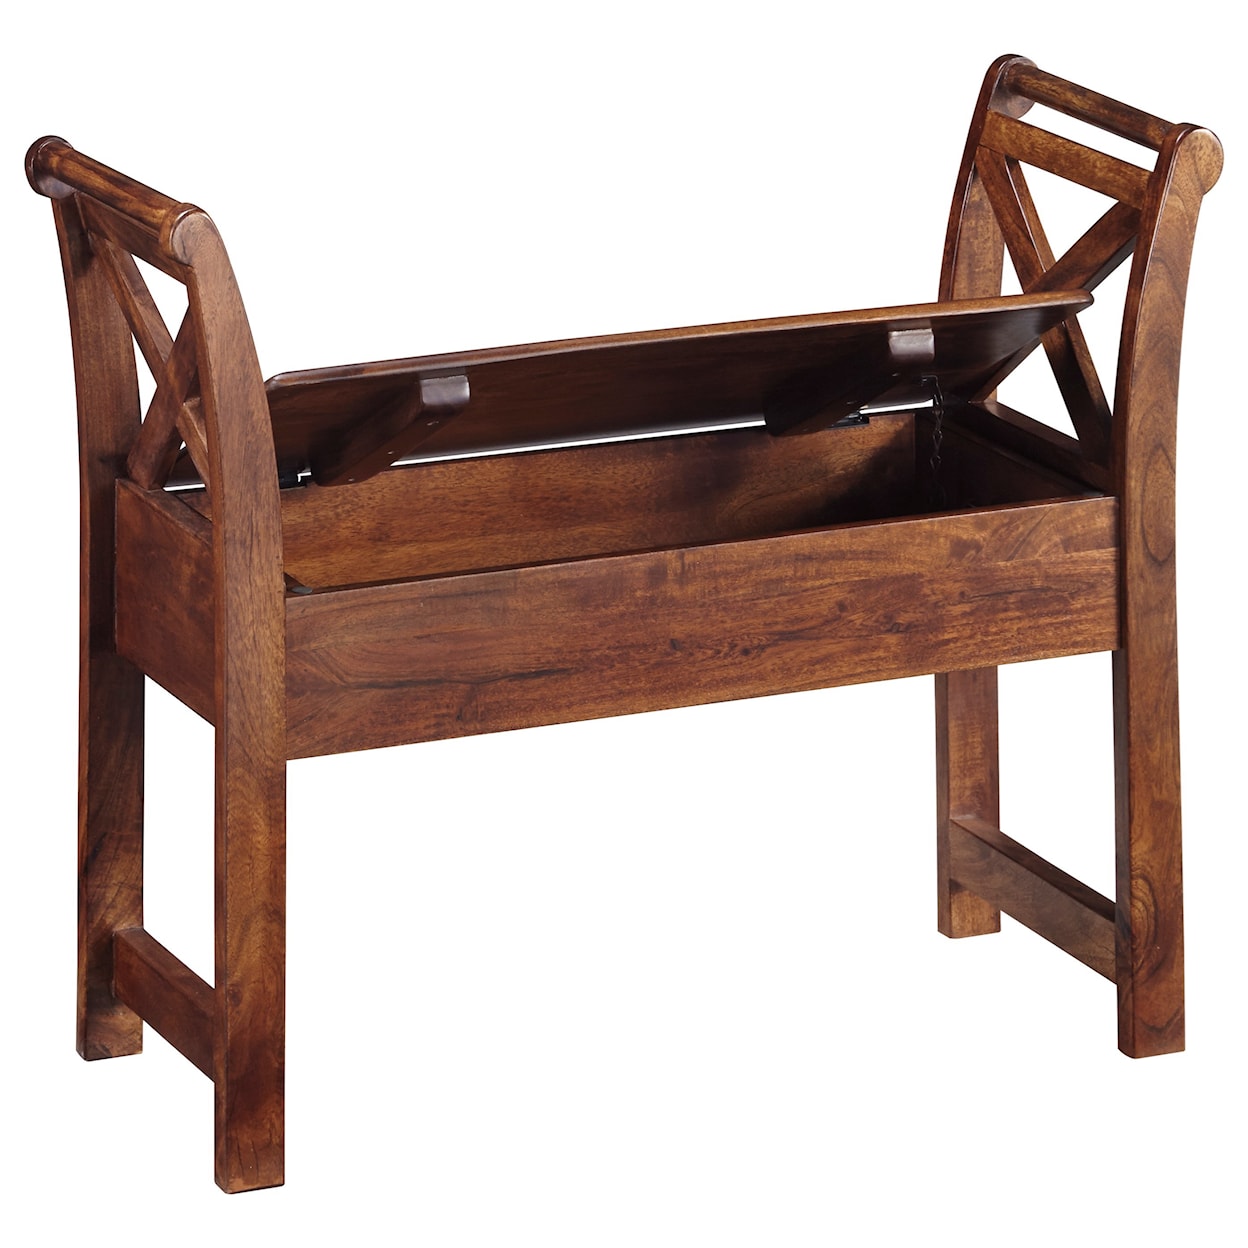 Michael Alan Select Abbonto Accent Bench